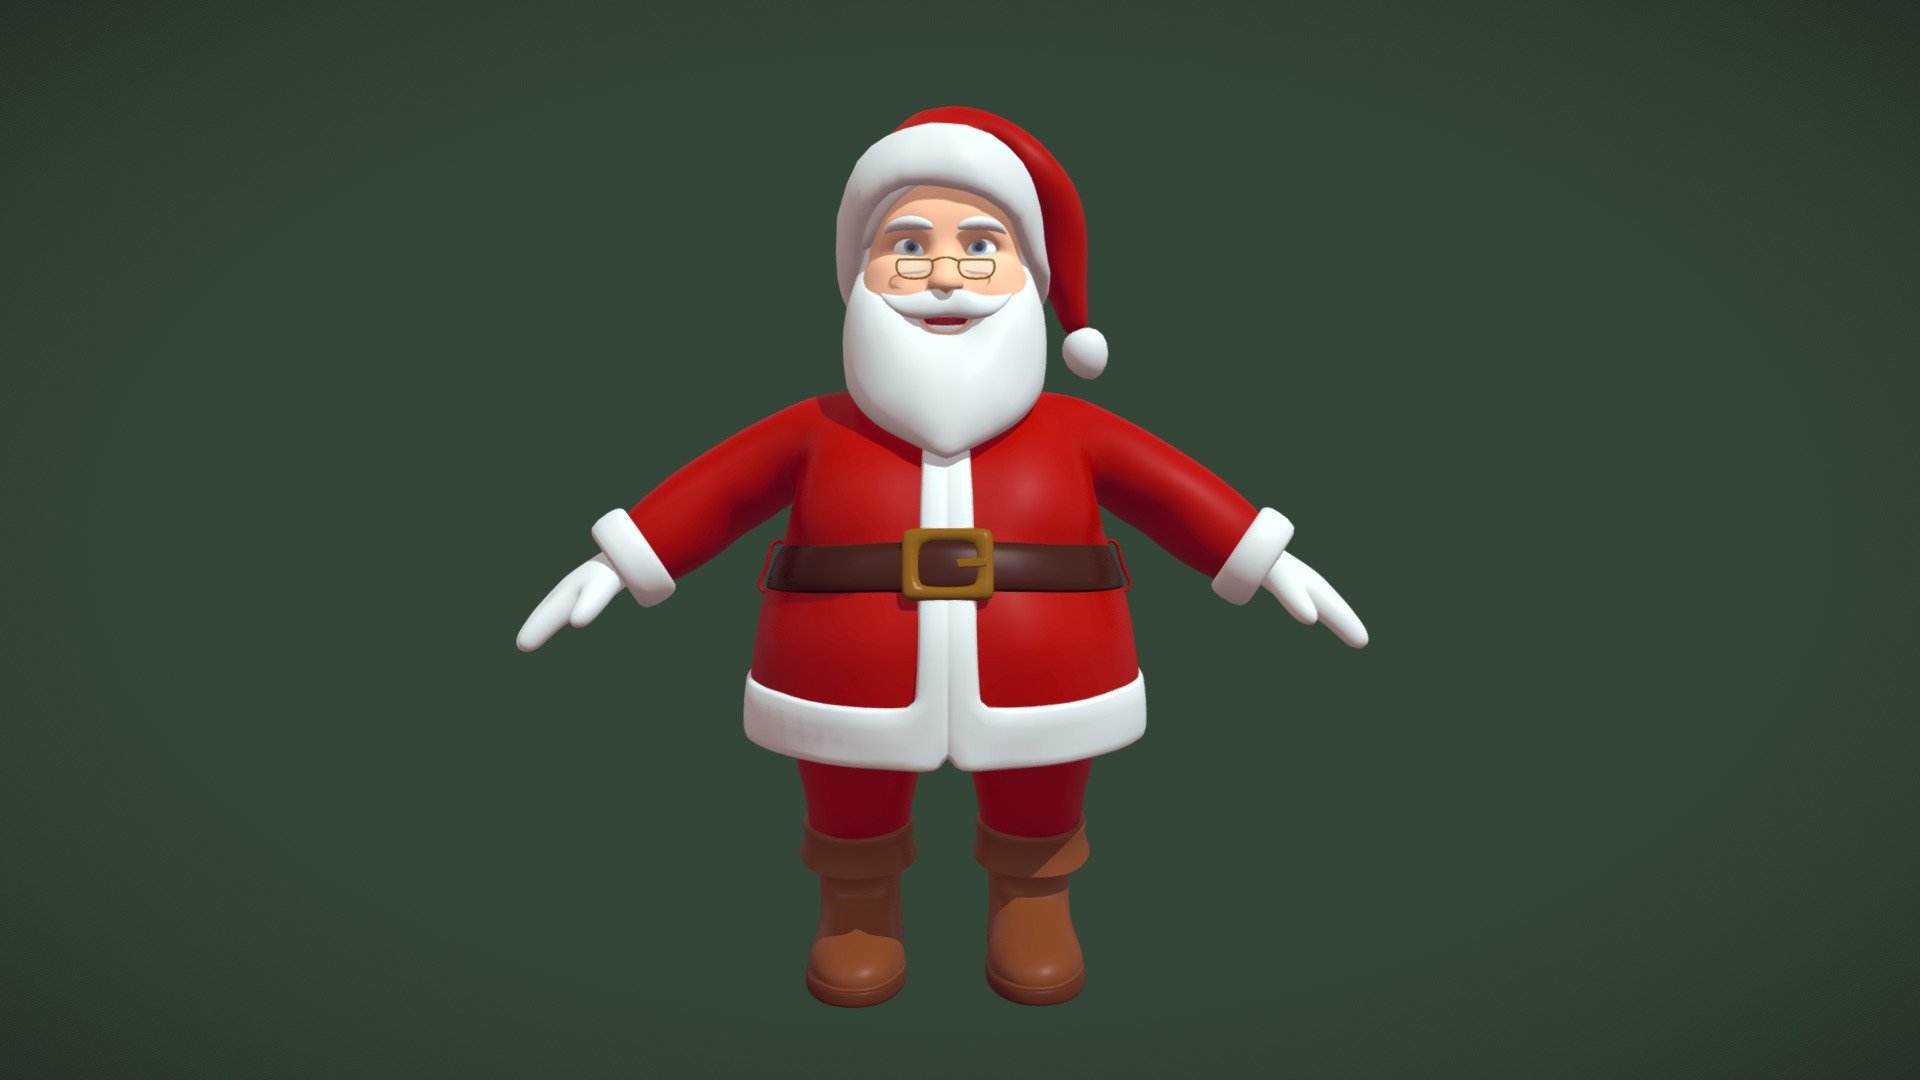 Funny cartoon Santa Claus made with Blender



More images of this 3D model in my portfolio:

https://www.behance.net/gallery/132771547/3D-Cartoon-Santa-Claus - Cartoon Santa Claus - Buy Royalty Free 3D model by Starkosha 3d model